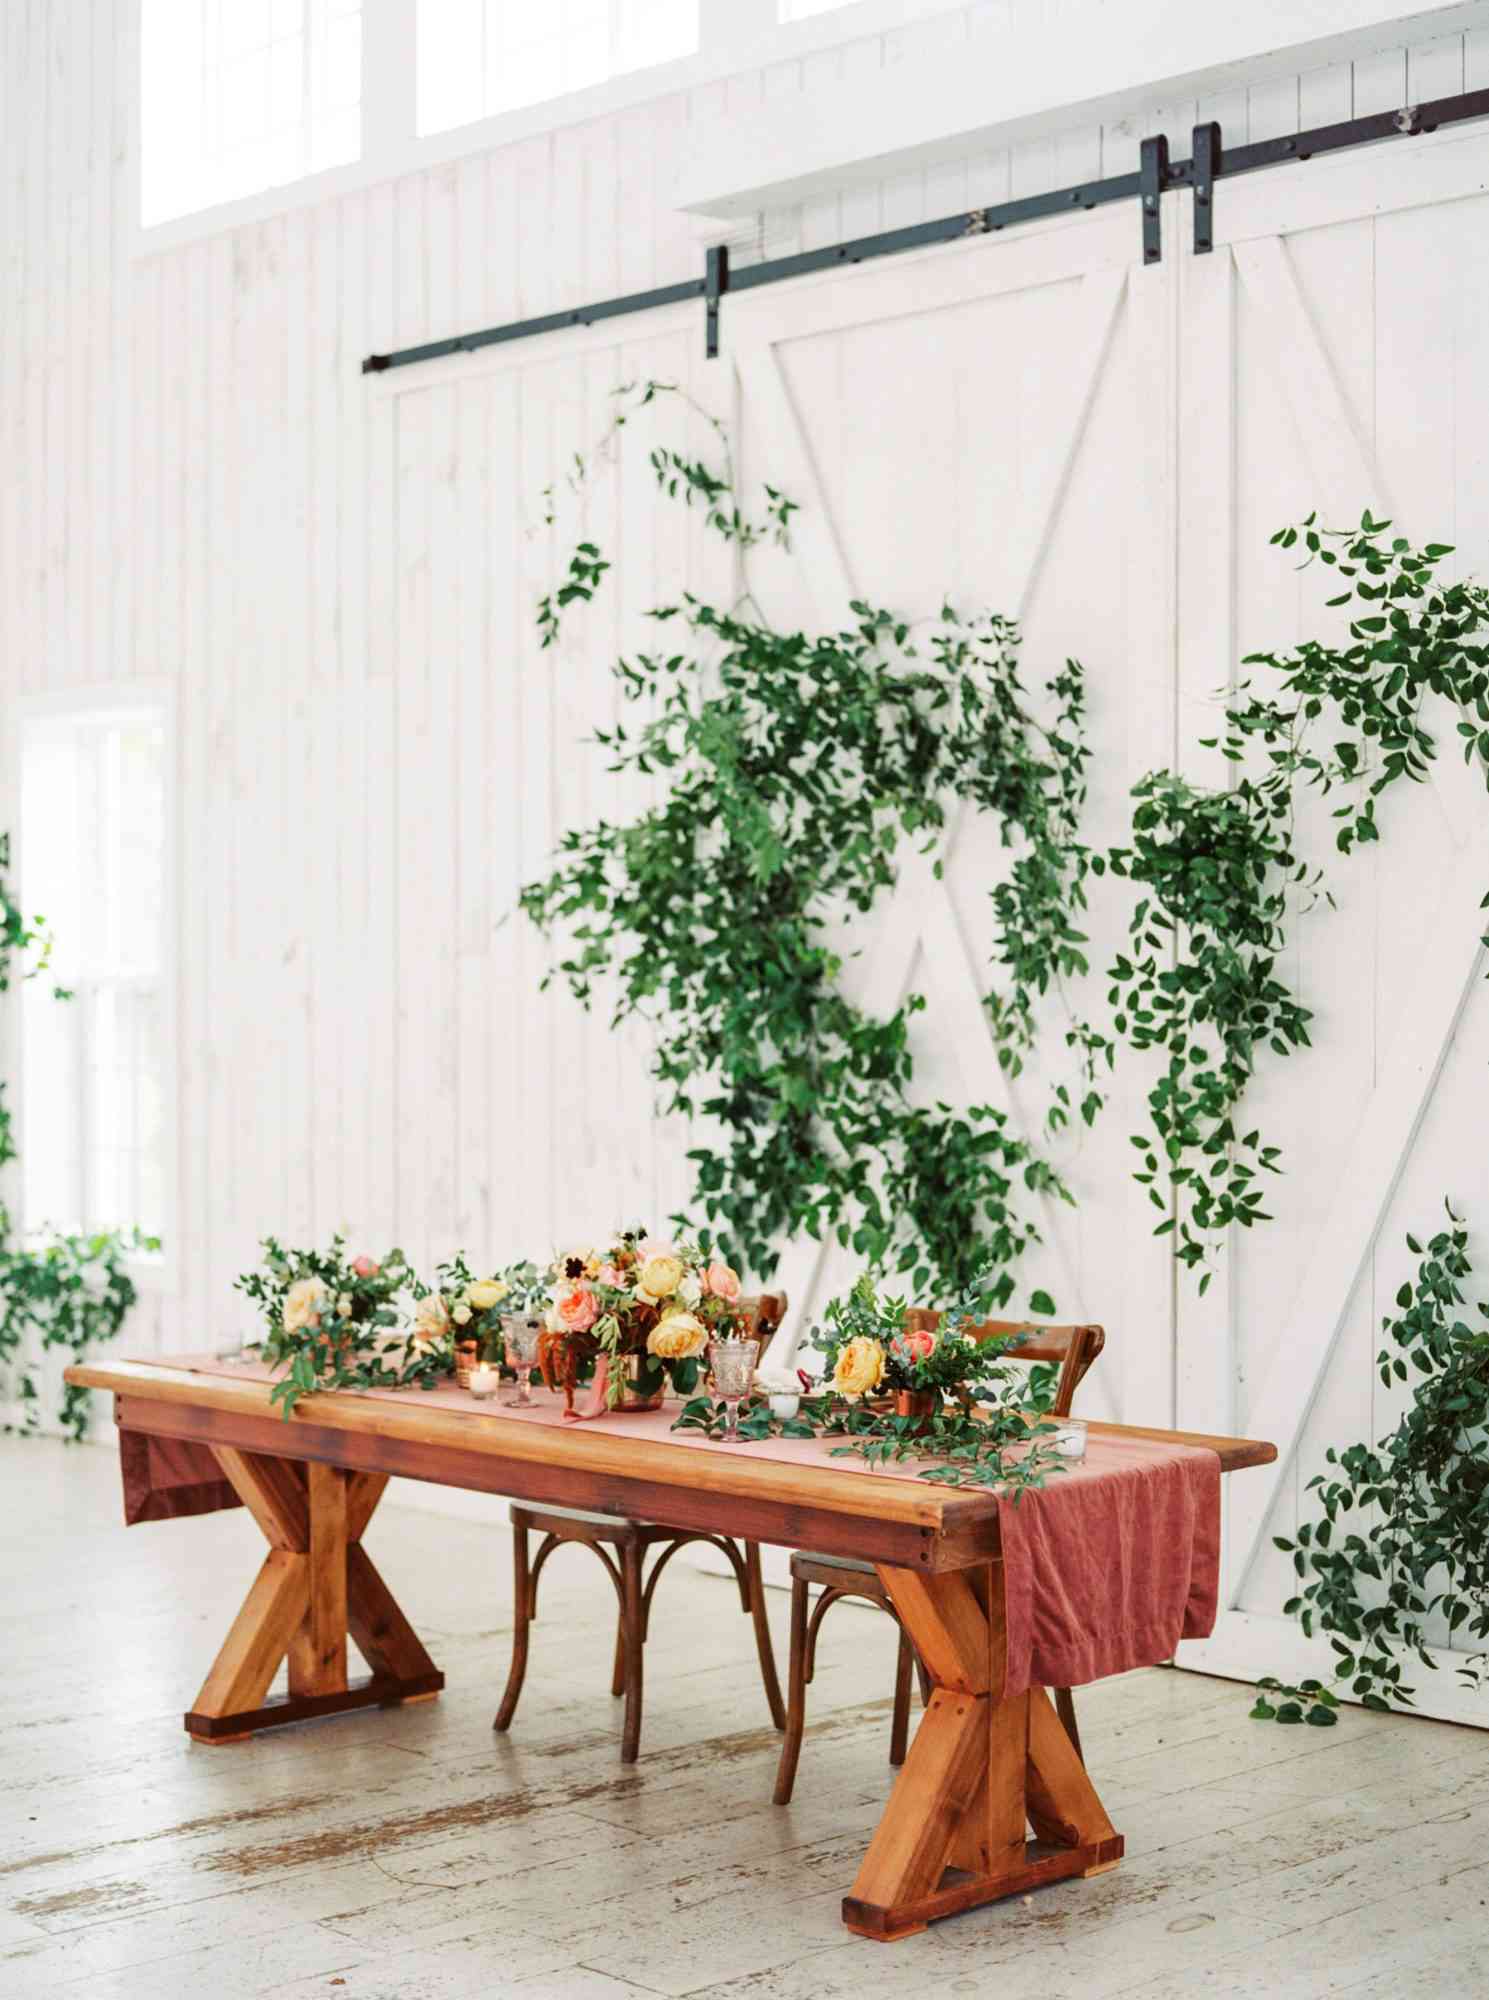 sweetheart table wooden with green leaf accented back drop